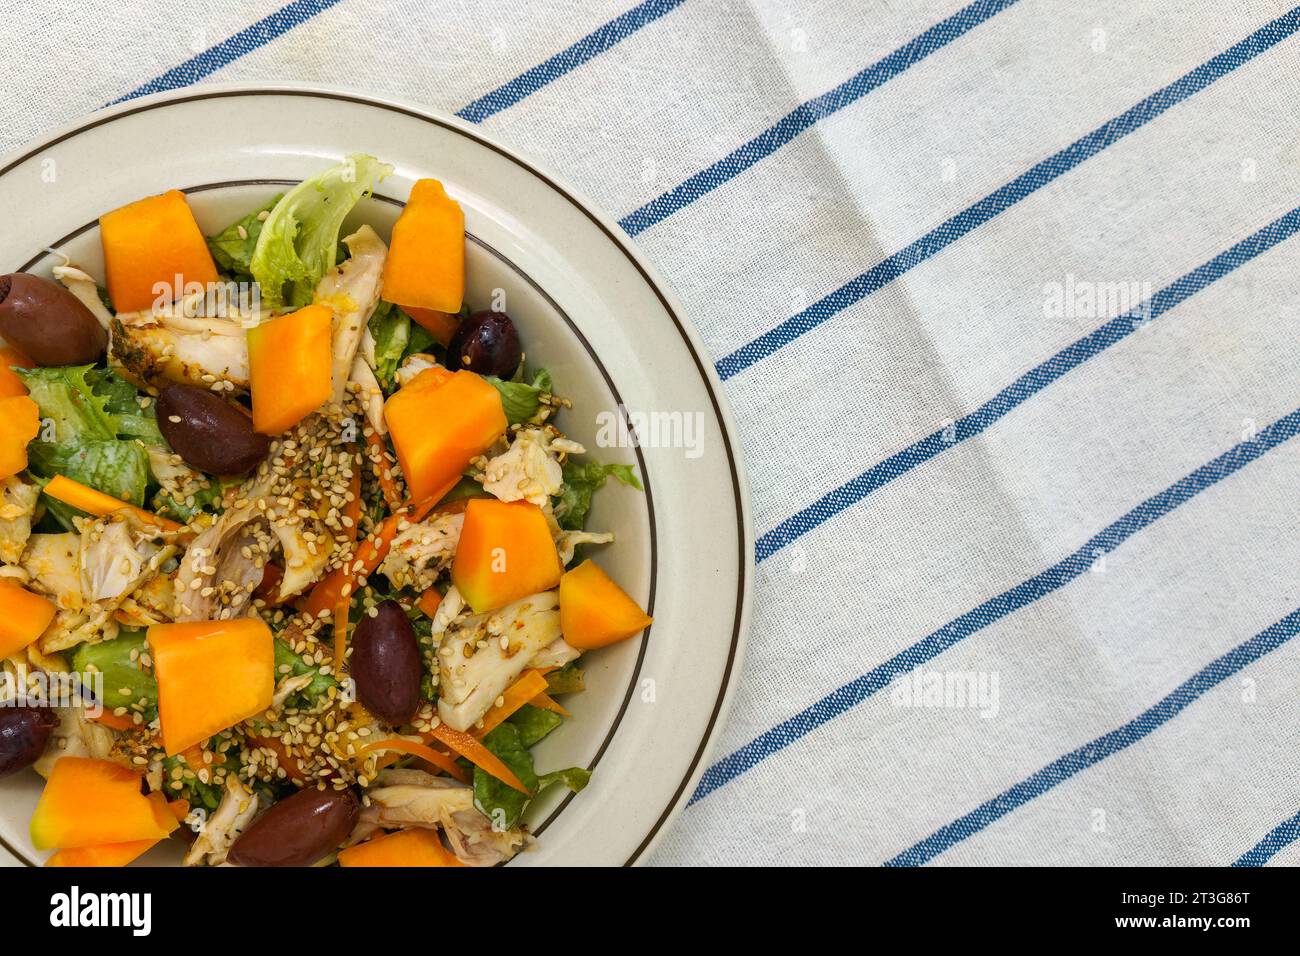 Fresh chicken salad with kalamata olives, cantaloupe melon and sesame seeds. Top view on white kitchen towel with blue stripes. Stock Photo